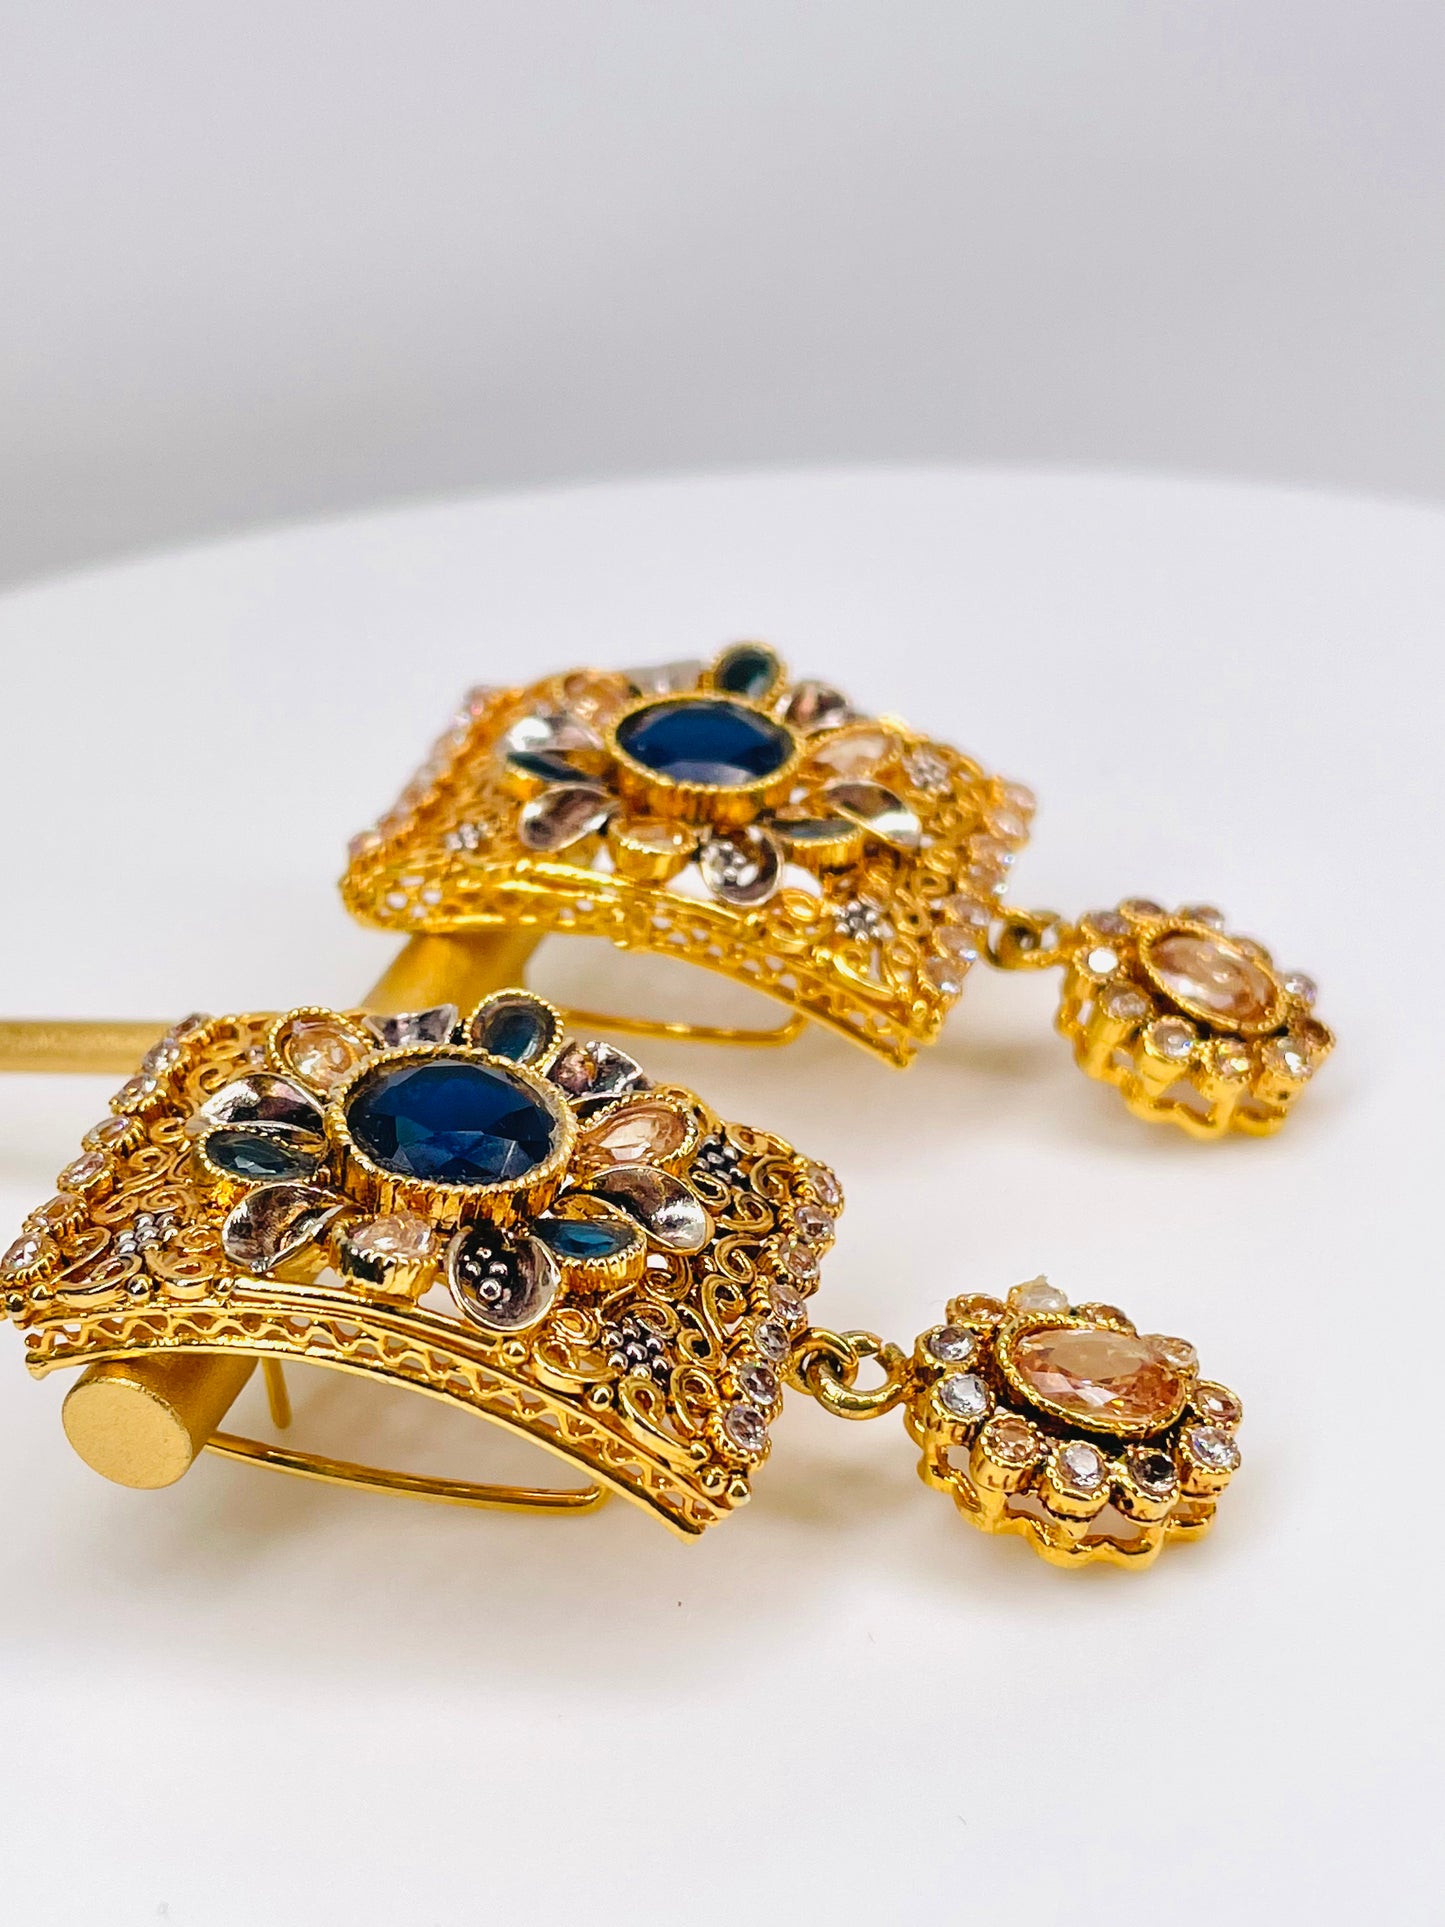 Antique Gold Polished Sapphire And Champagne Stone Earrings